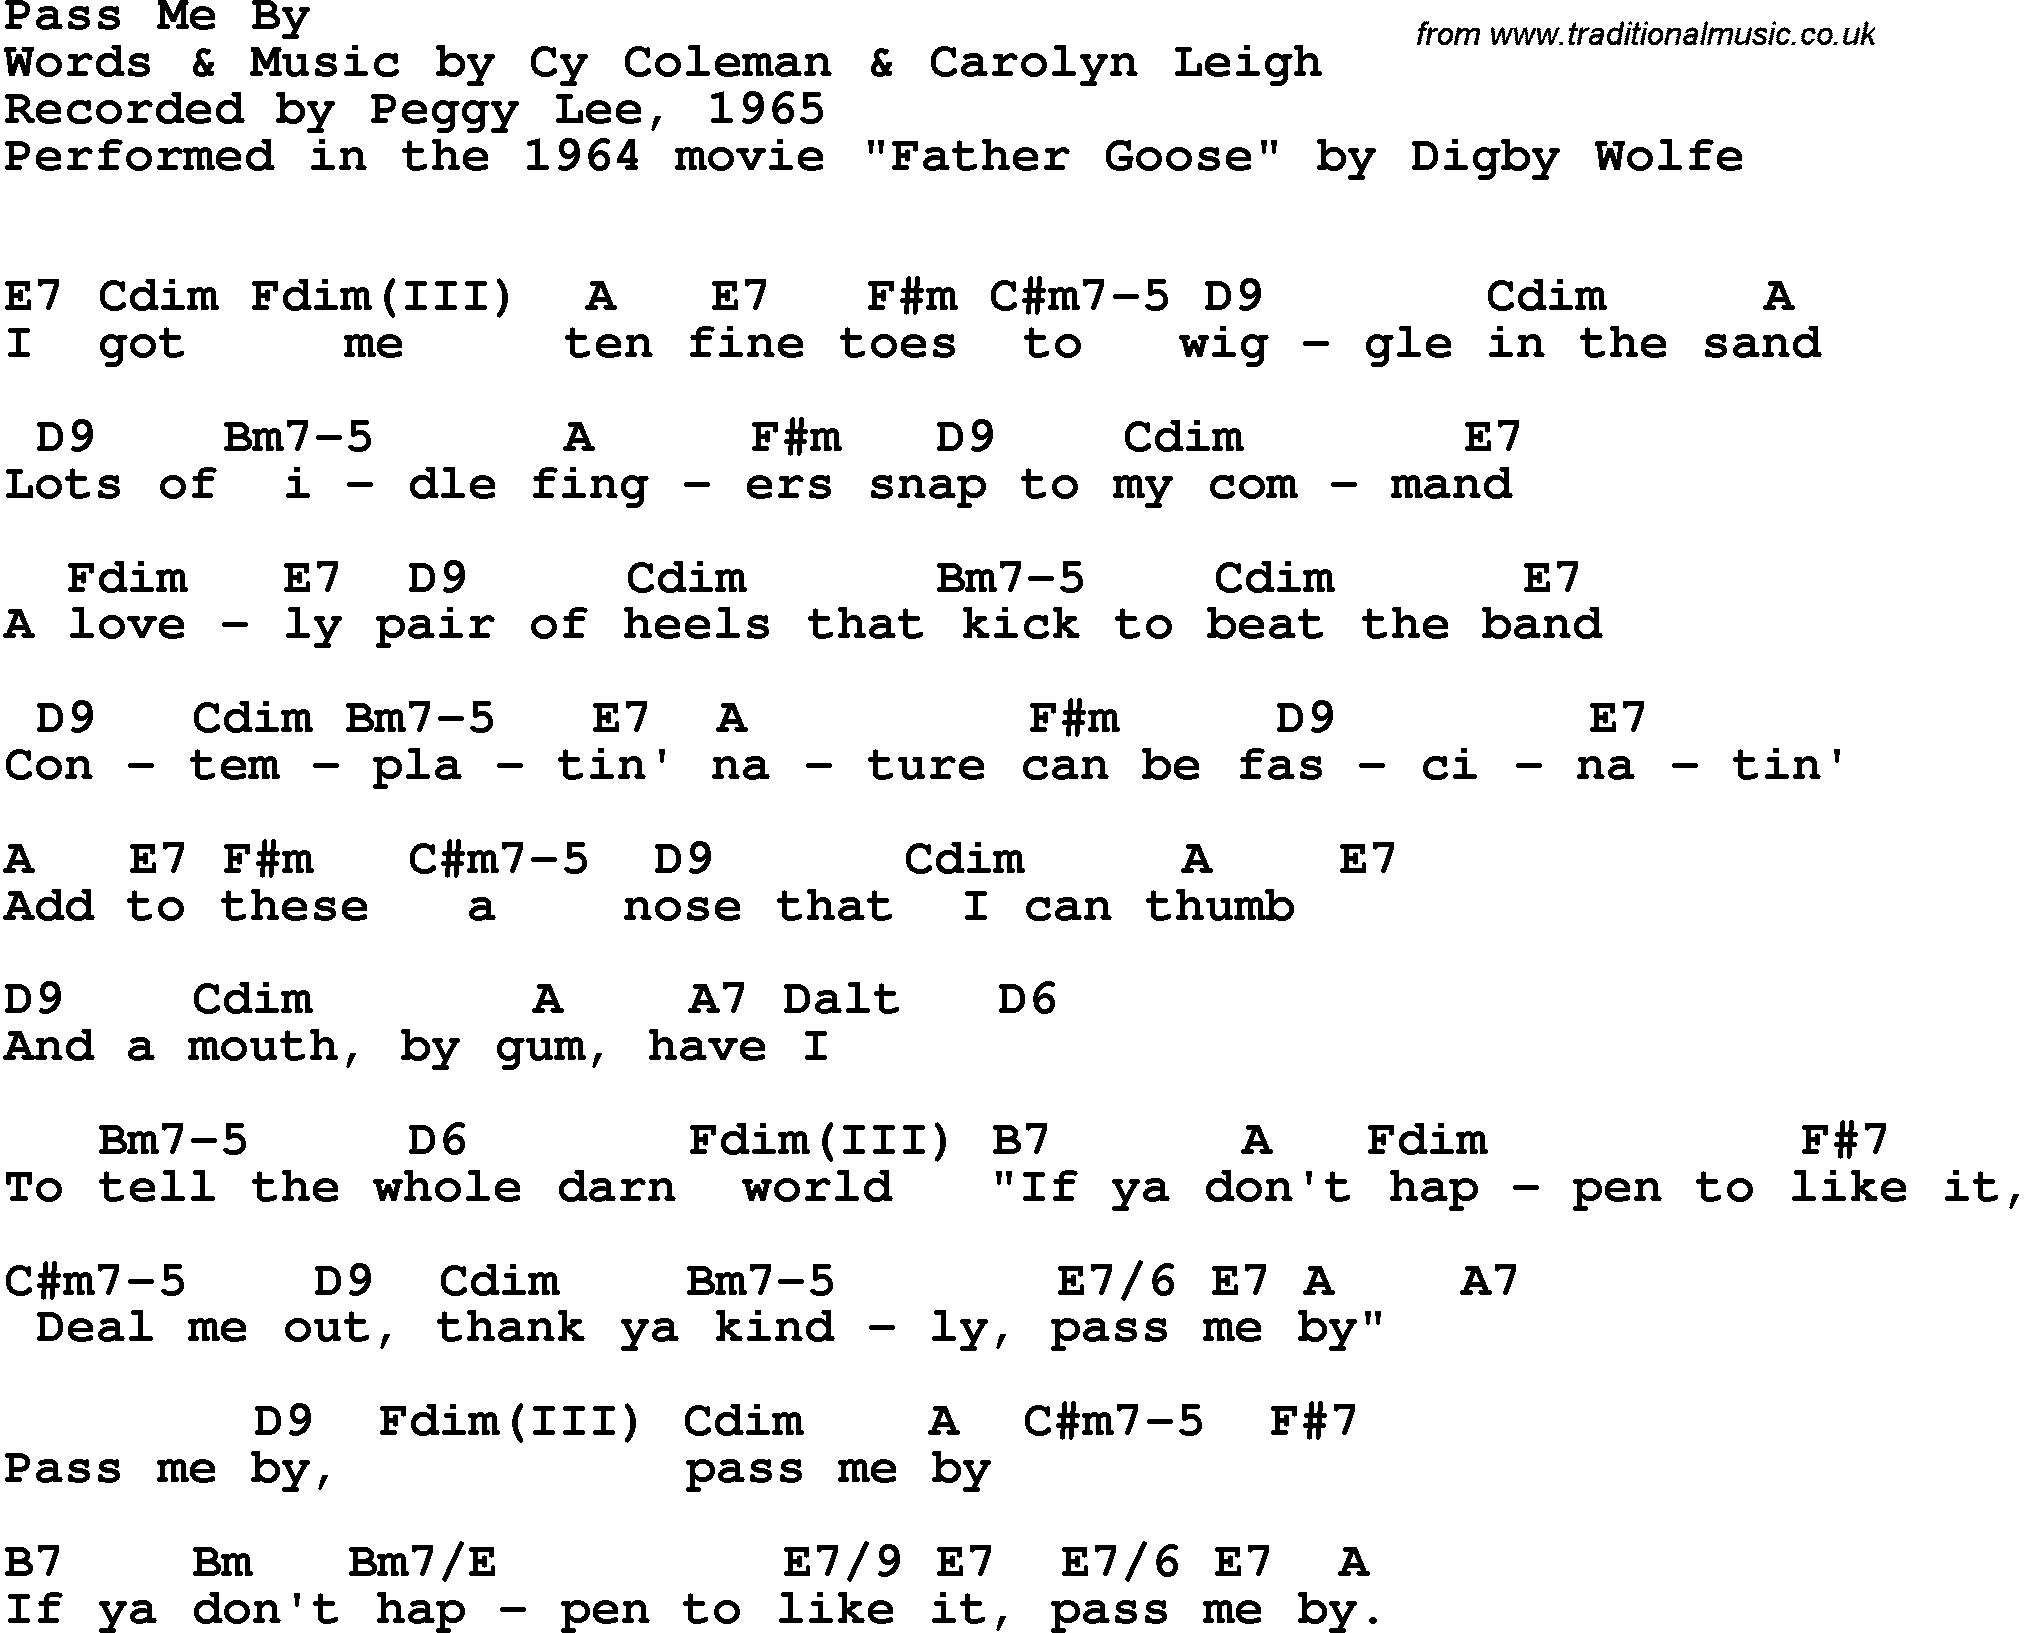 Song Lyrics with guitar chords for Pass Me By - Peggy Lee, 1965